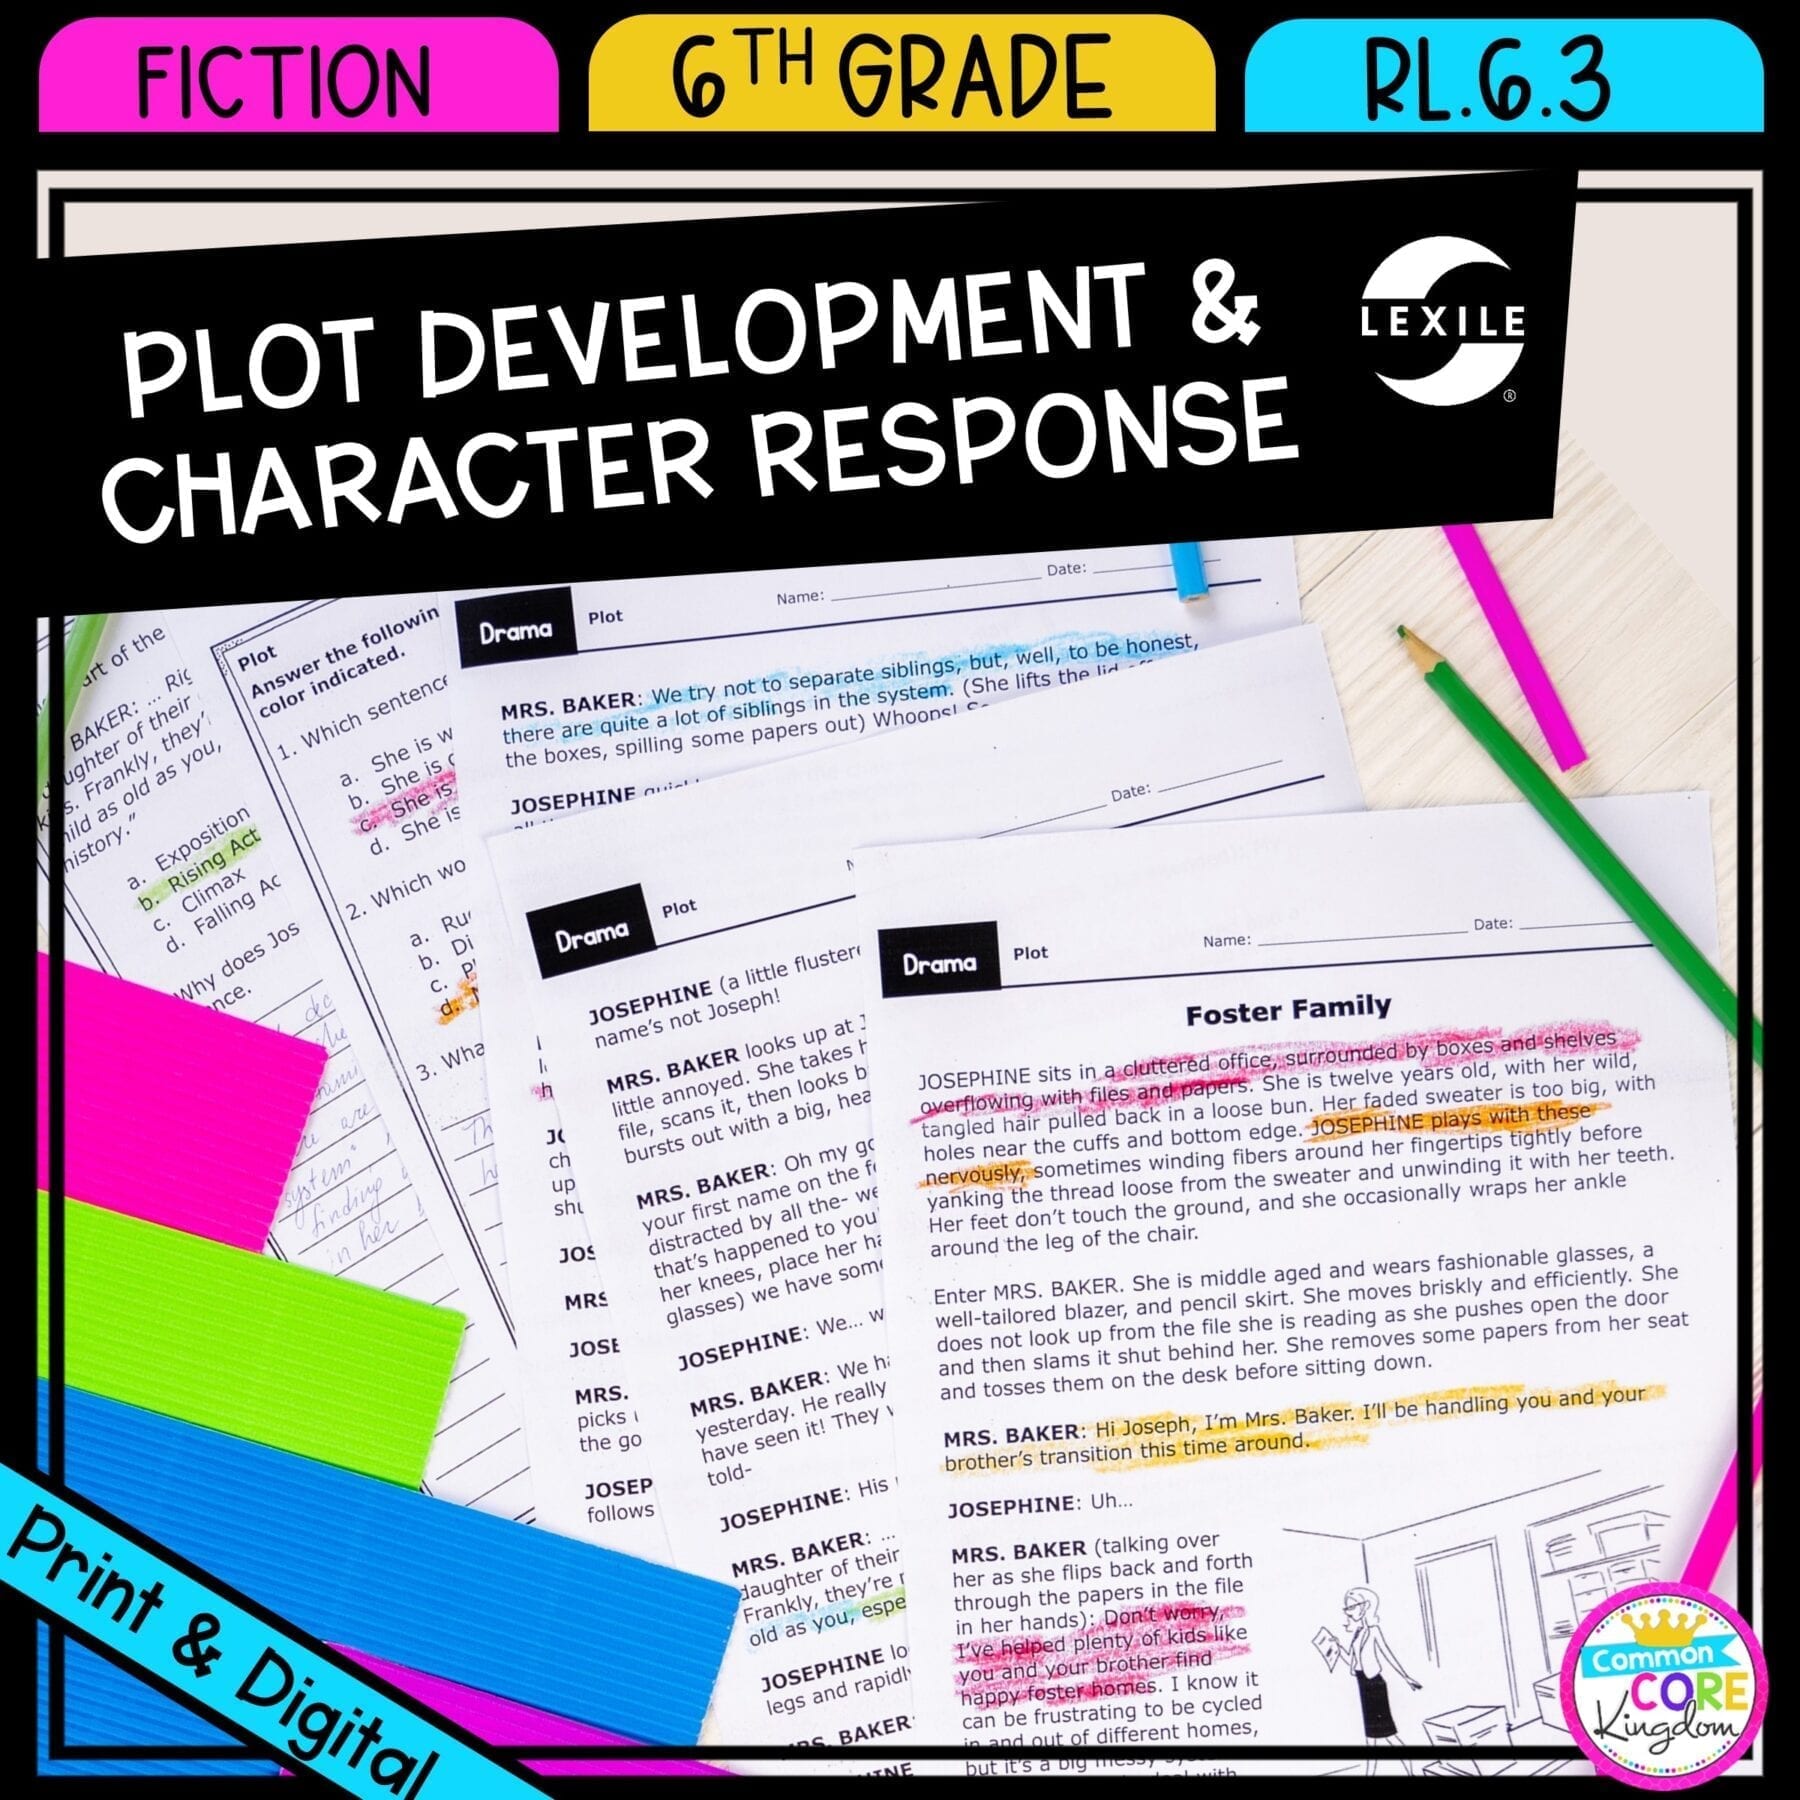 RL.6.3 Plot Development & Character Response cover showing three passage pages that can be printed or viewed digitally